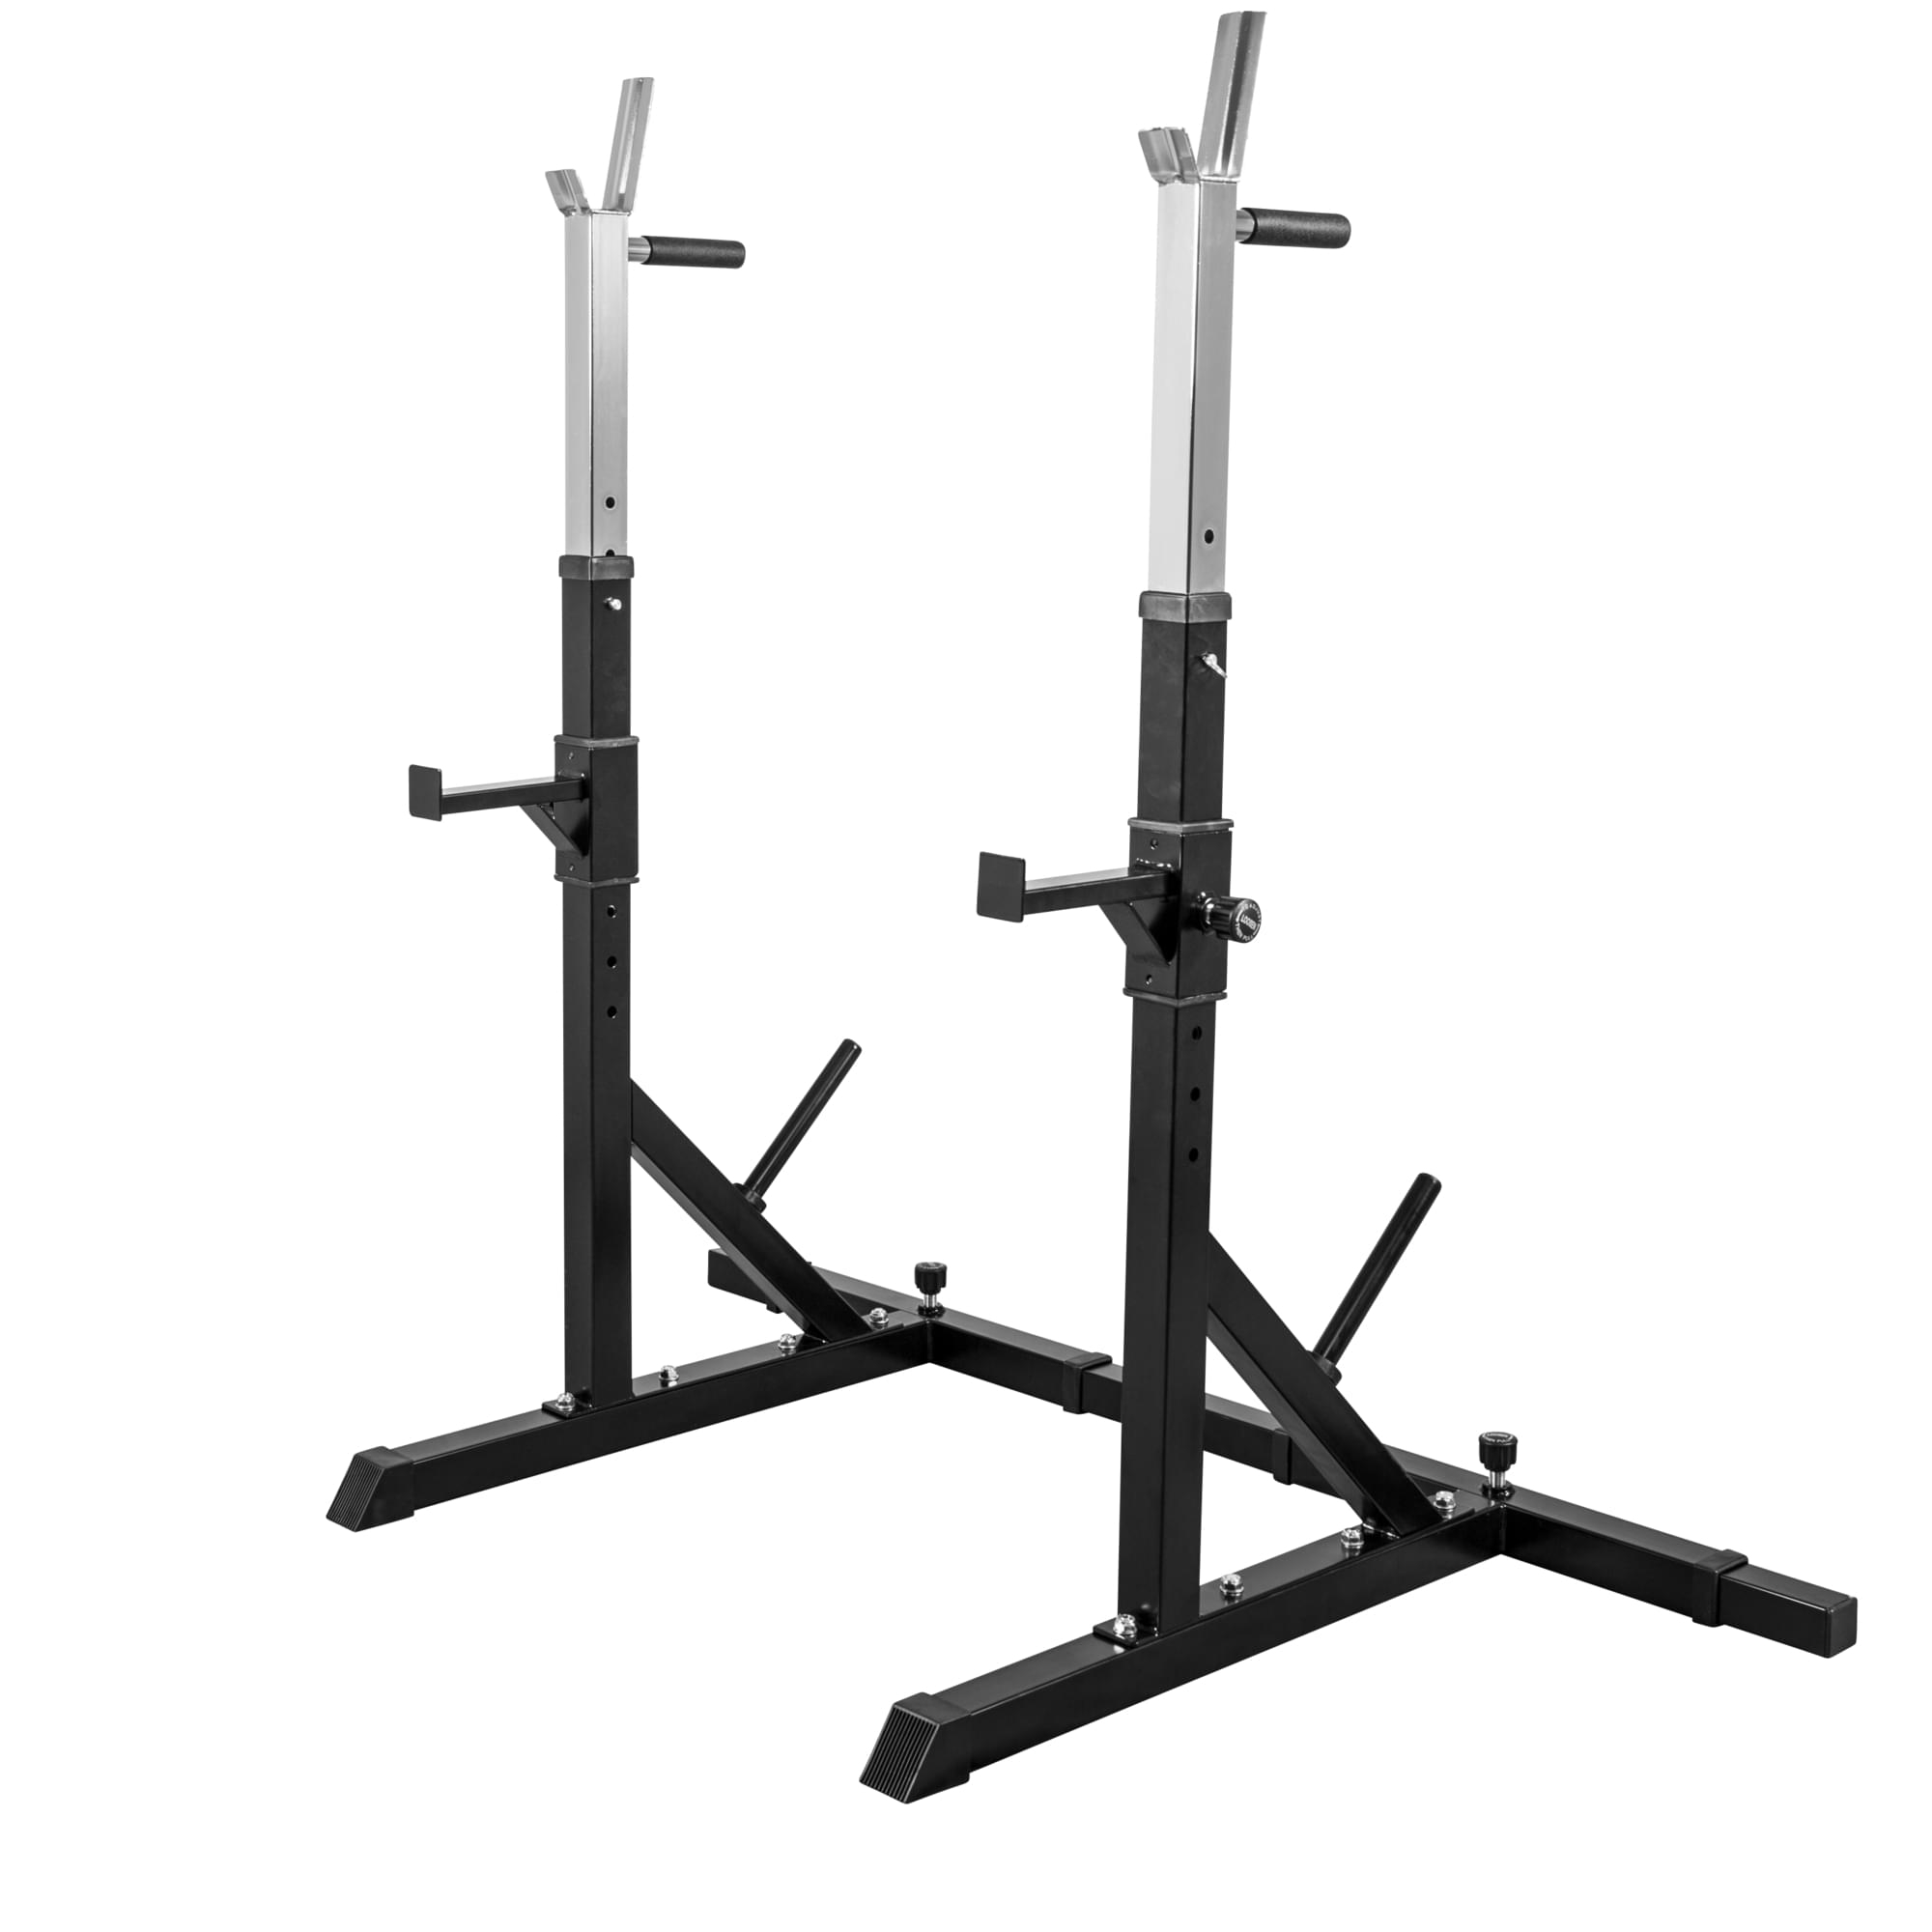 Max Load 250kg YRX Squat Rack Stands Adjustable Barbell Rack with Dip Bar Home Gym Fitness Stands Piece of Equipment Multi-Function squat Weight Lifting bench Rack 